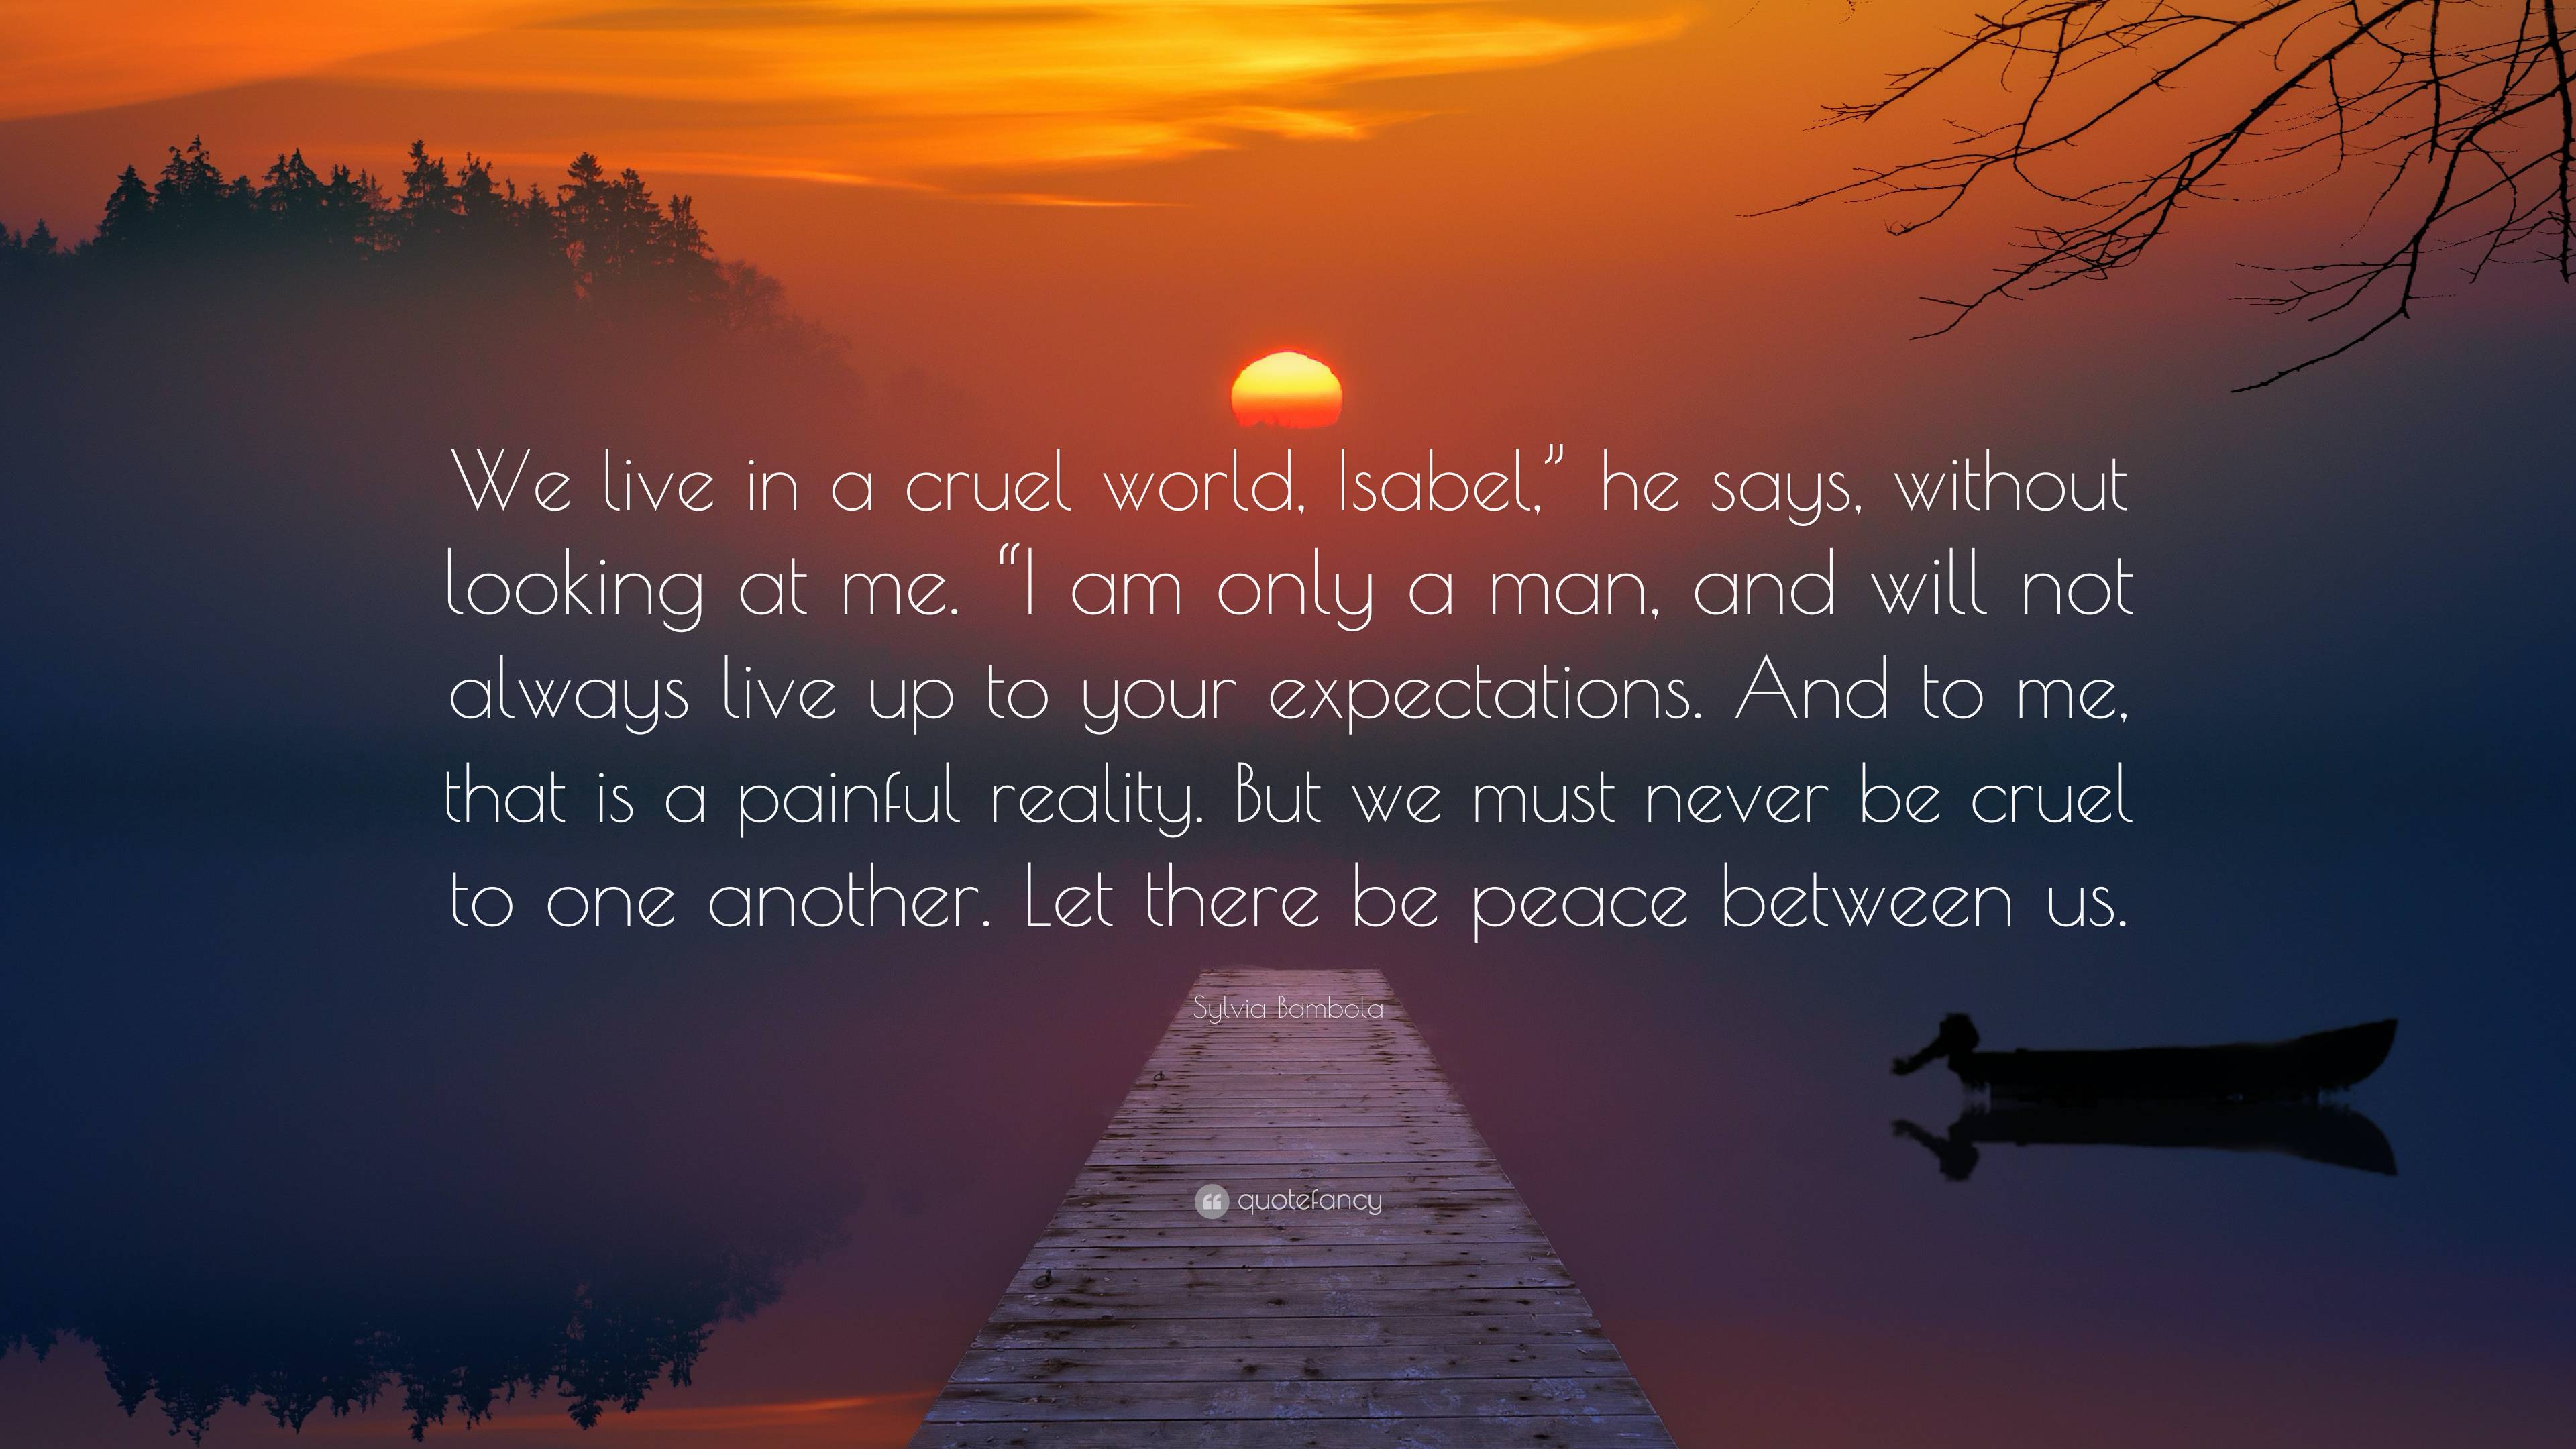 https://quotefancy.com/media/wallpaper/3840x2160/7428875-Sylvia-Bambola-Quote-We-live-in-a-cruel-world-Isabel-he-says.jpg